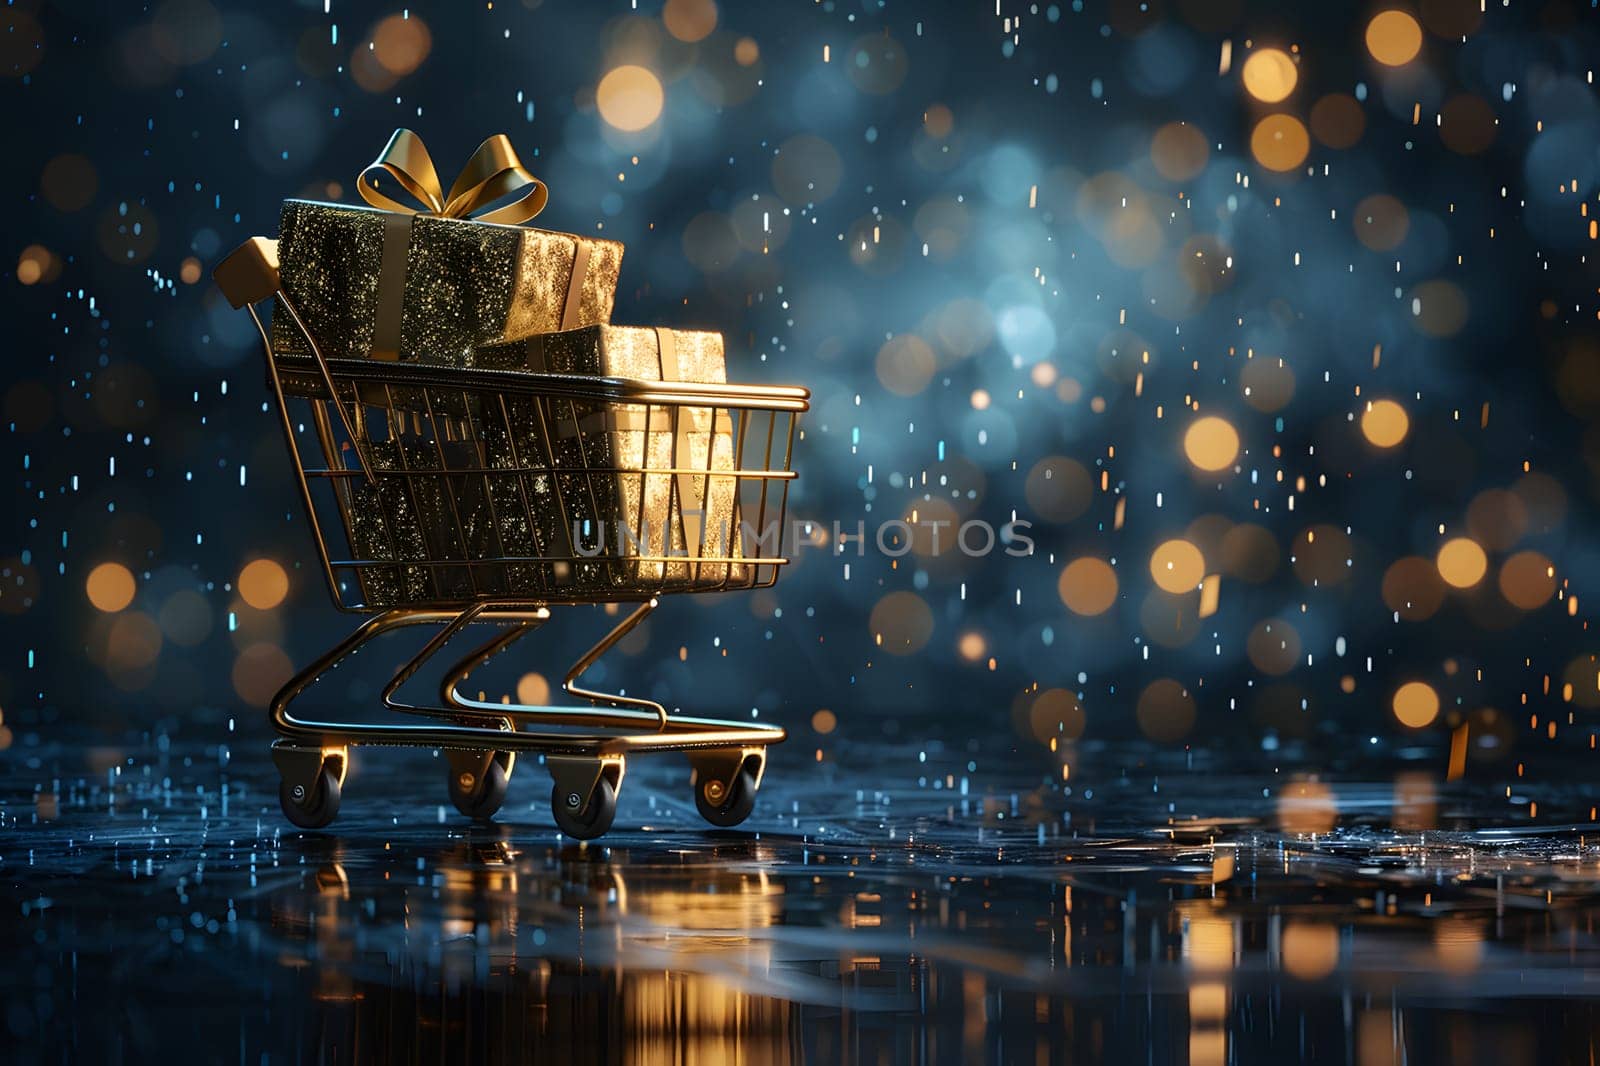 At midnight, a shopping cart filled with gifts sits on a wet surface in the city. Tower blocks loom in the darkness, creating a mysterious cityscape. The art of entertainment is present in this event